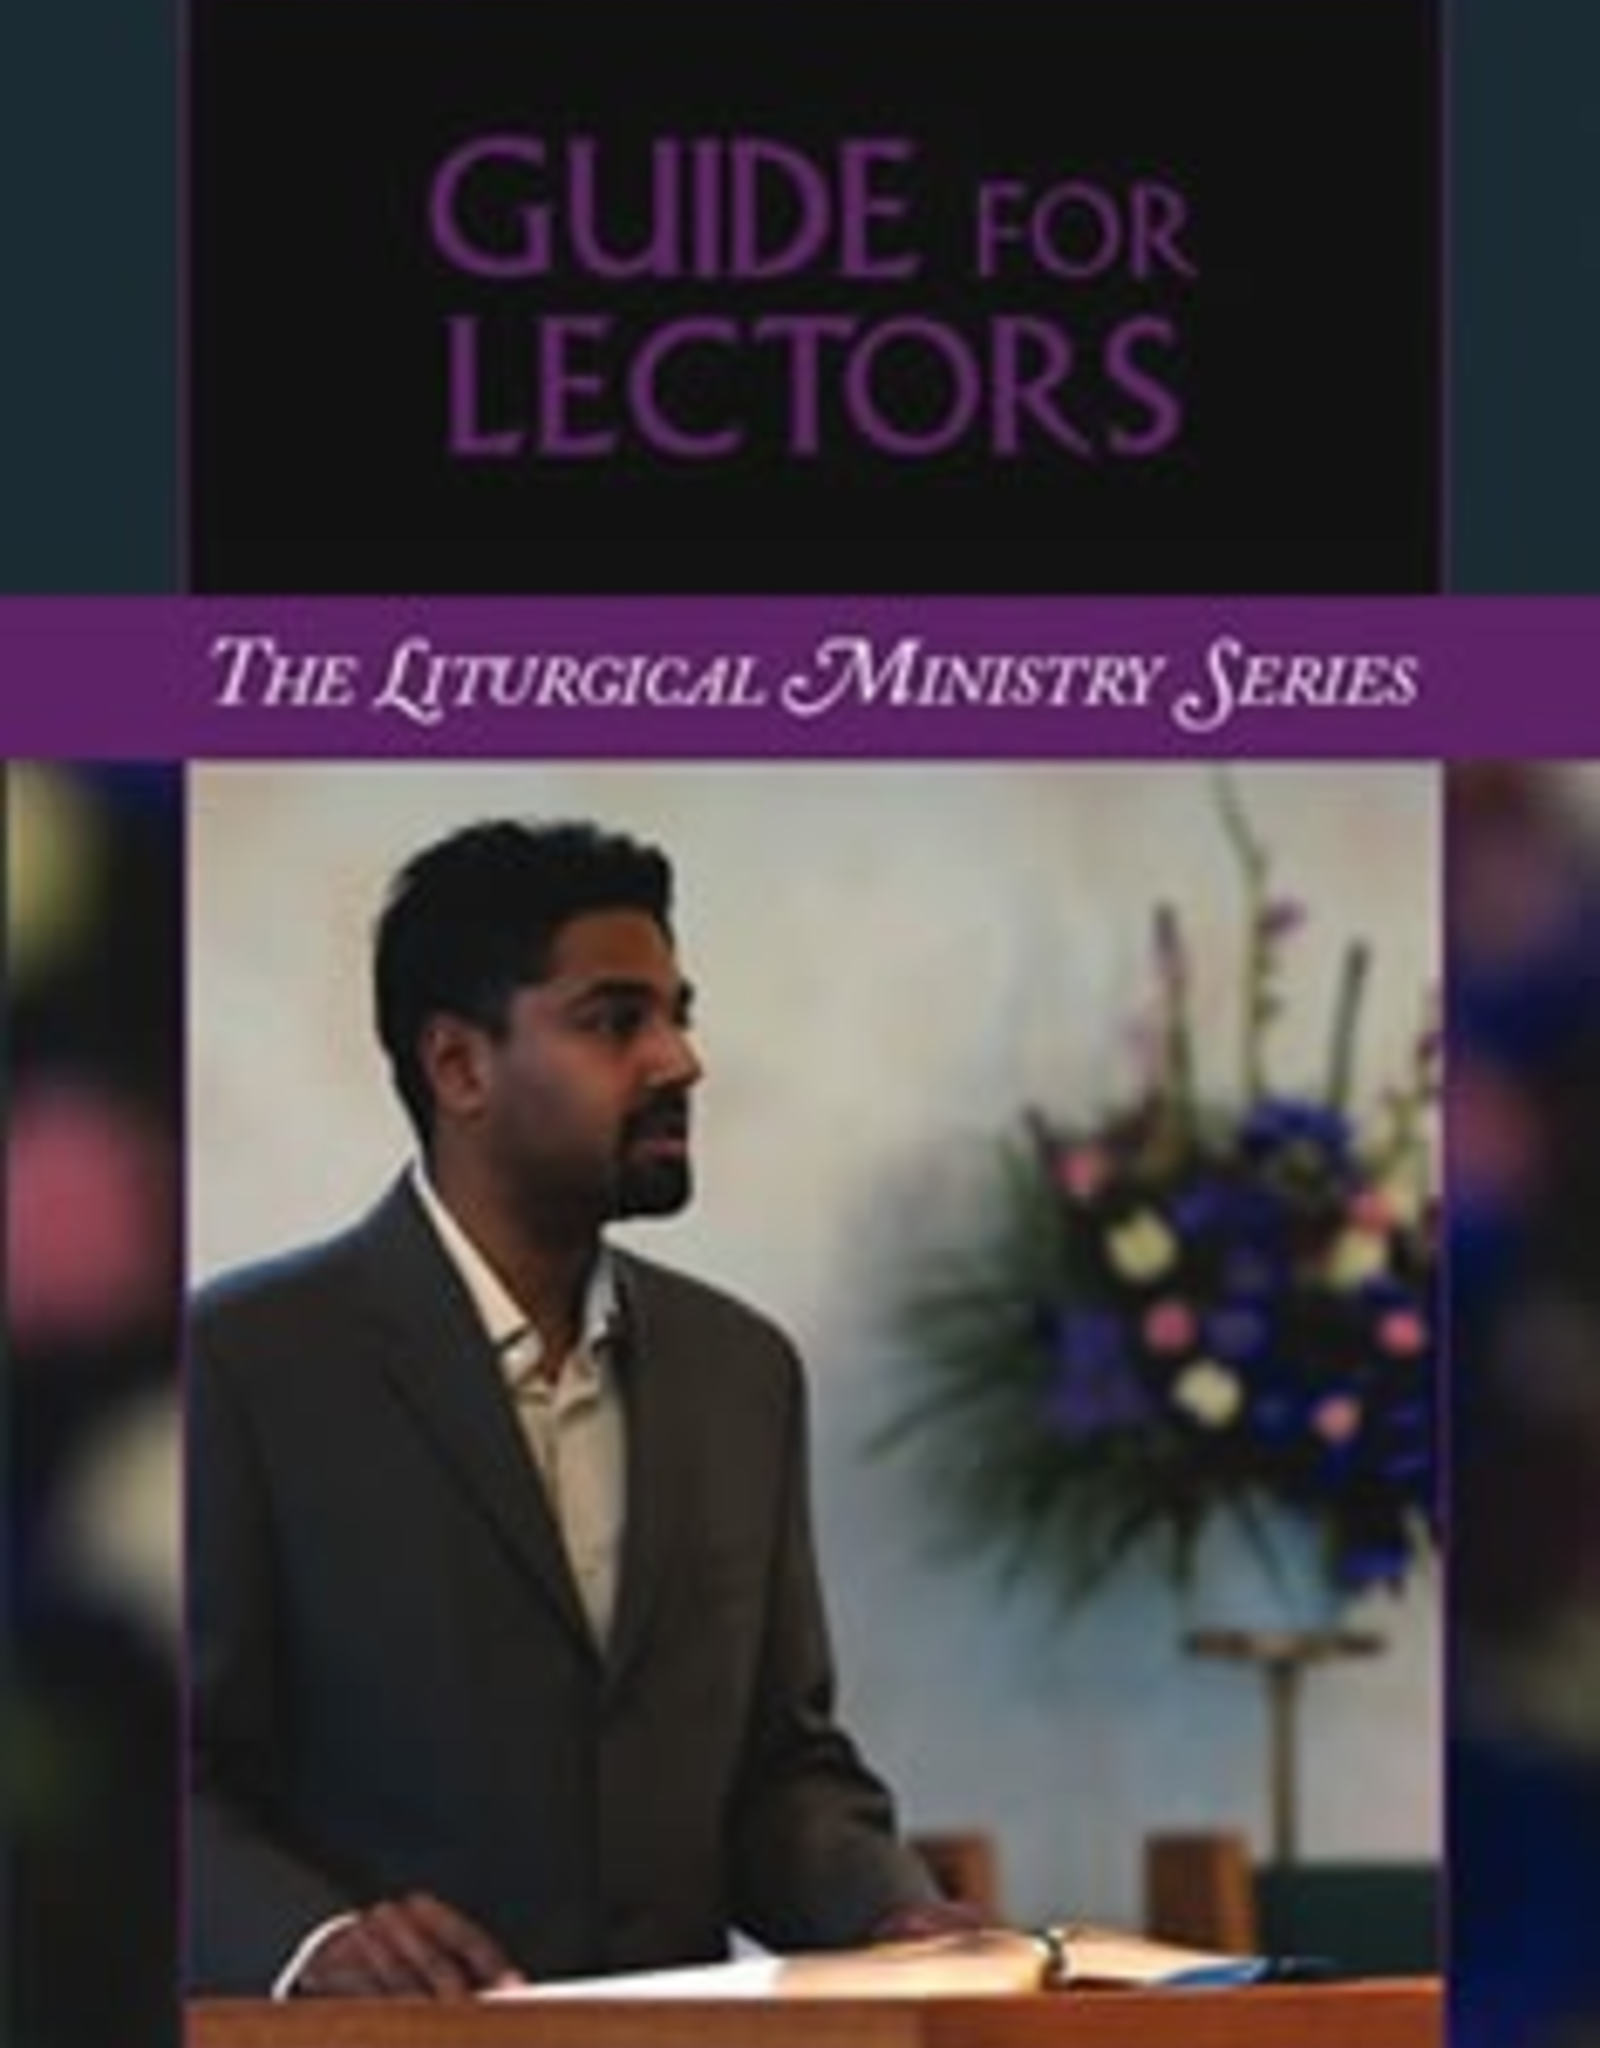 Liturgical Training Press Guide for Lectors, by Paul Turner and Virginia Meagher